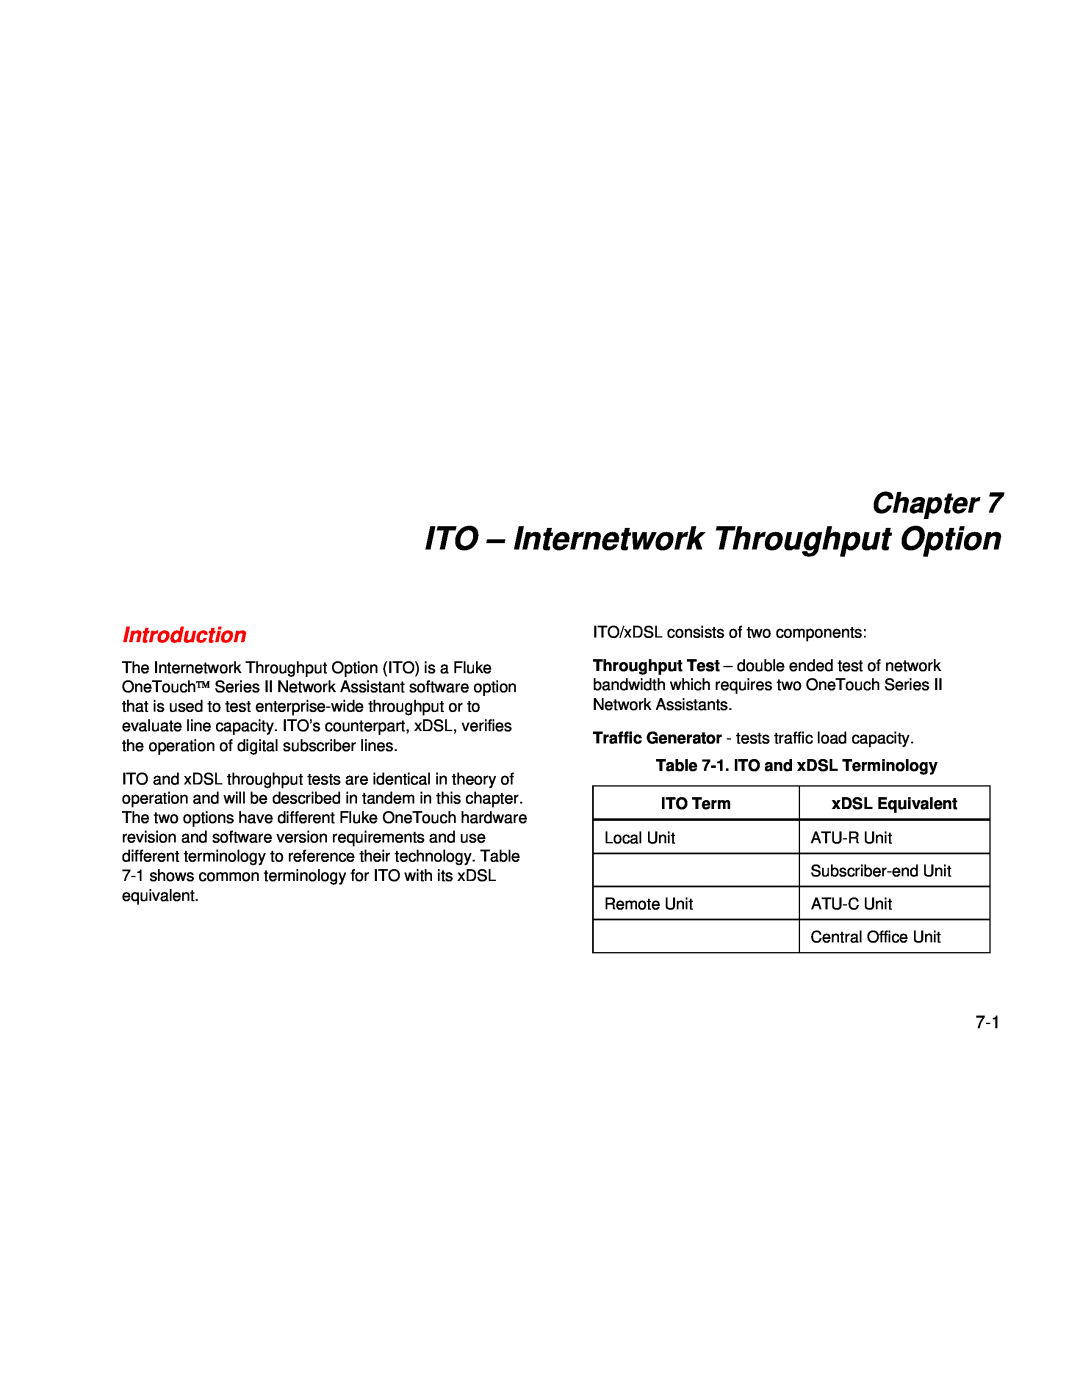 Fluke Series II ITO - Internetwork Throughput Option, Chapter, Introduction, 1. ITO and xDSL Terminology, ITO Term 